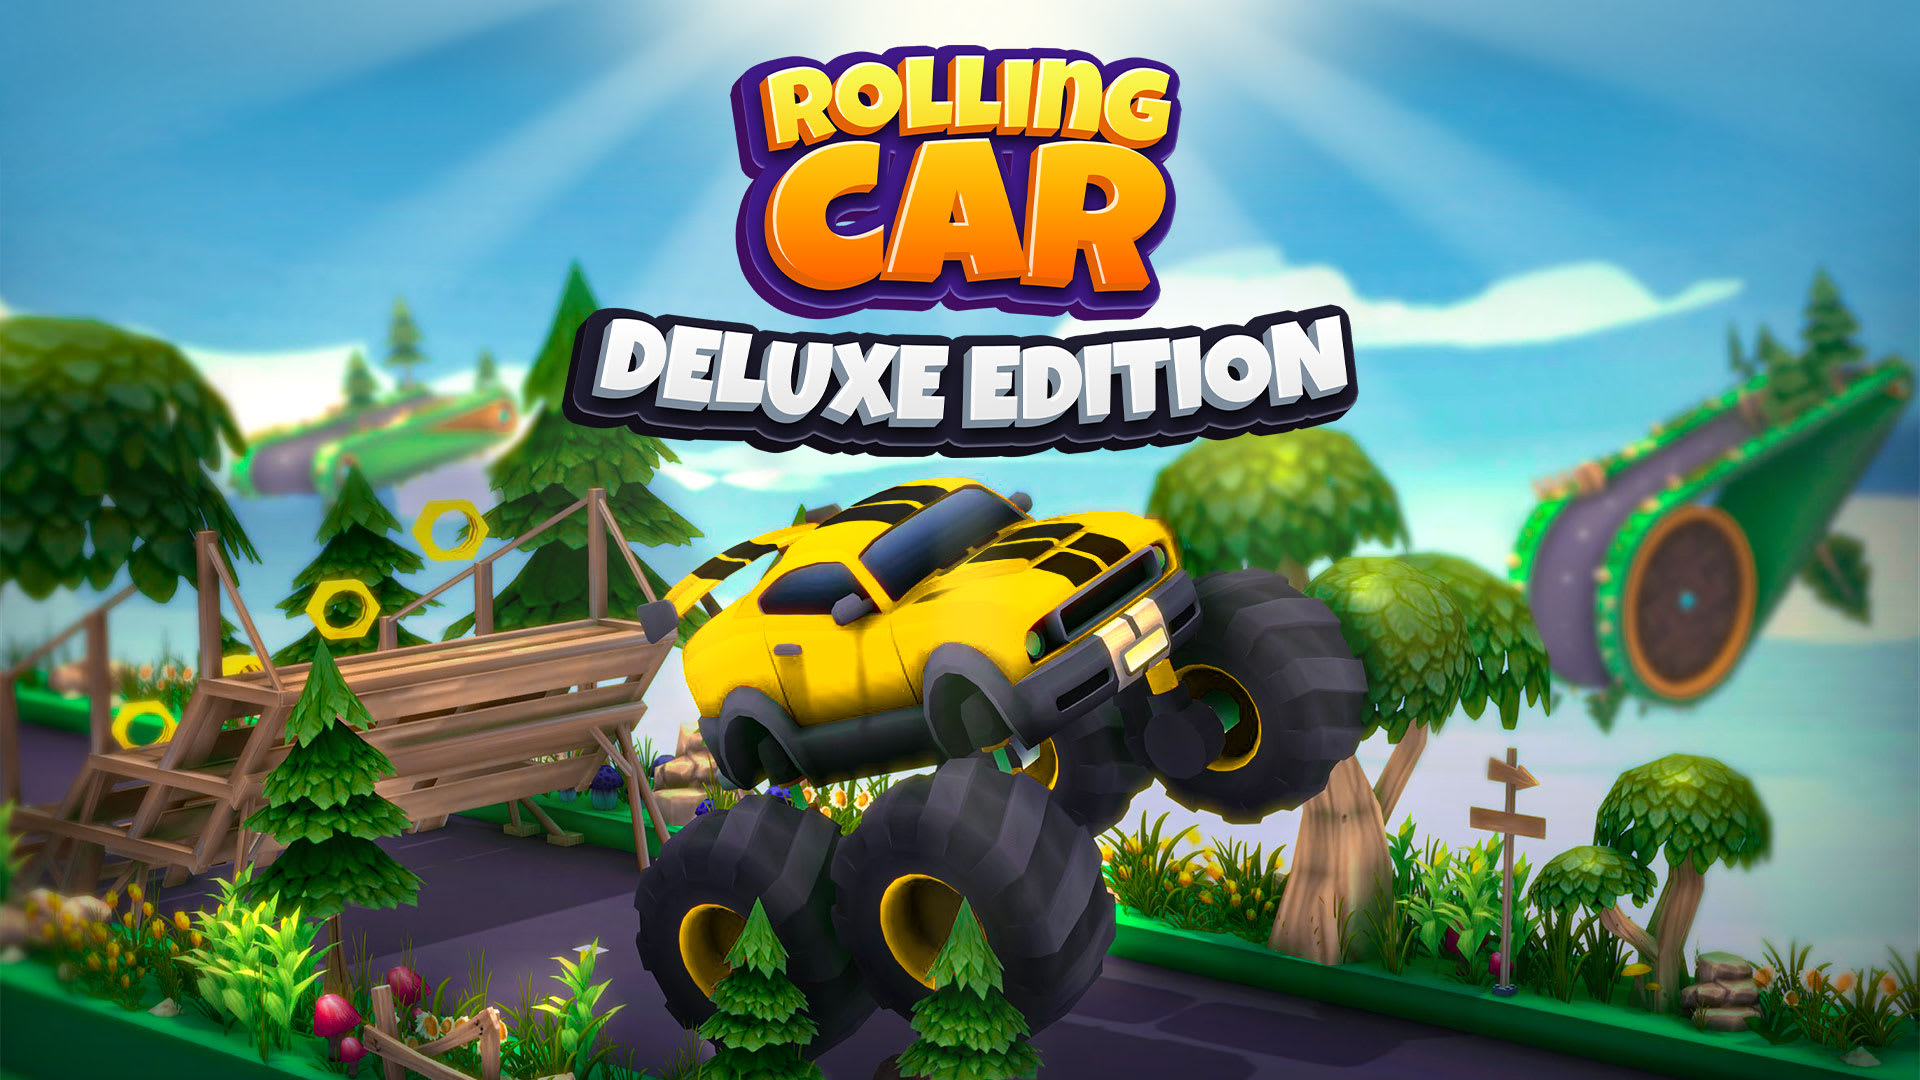 Rolling Car Deluxe Edition